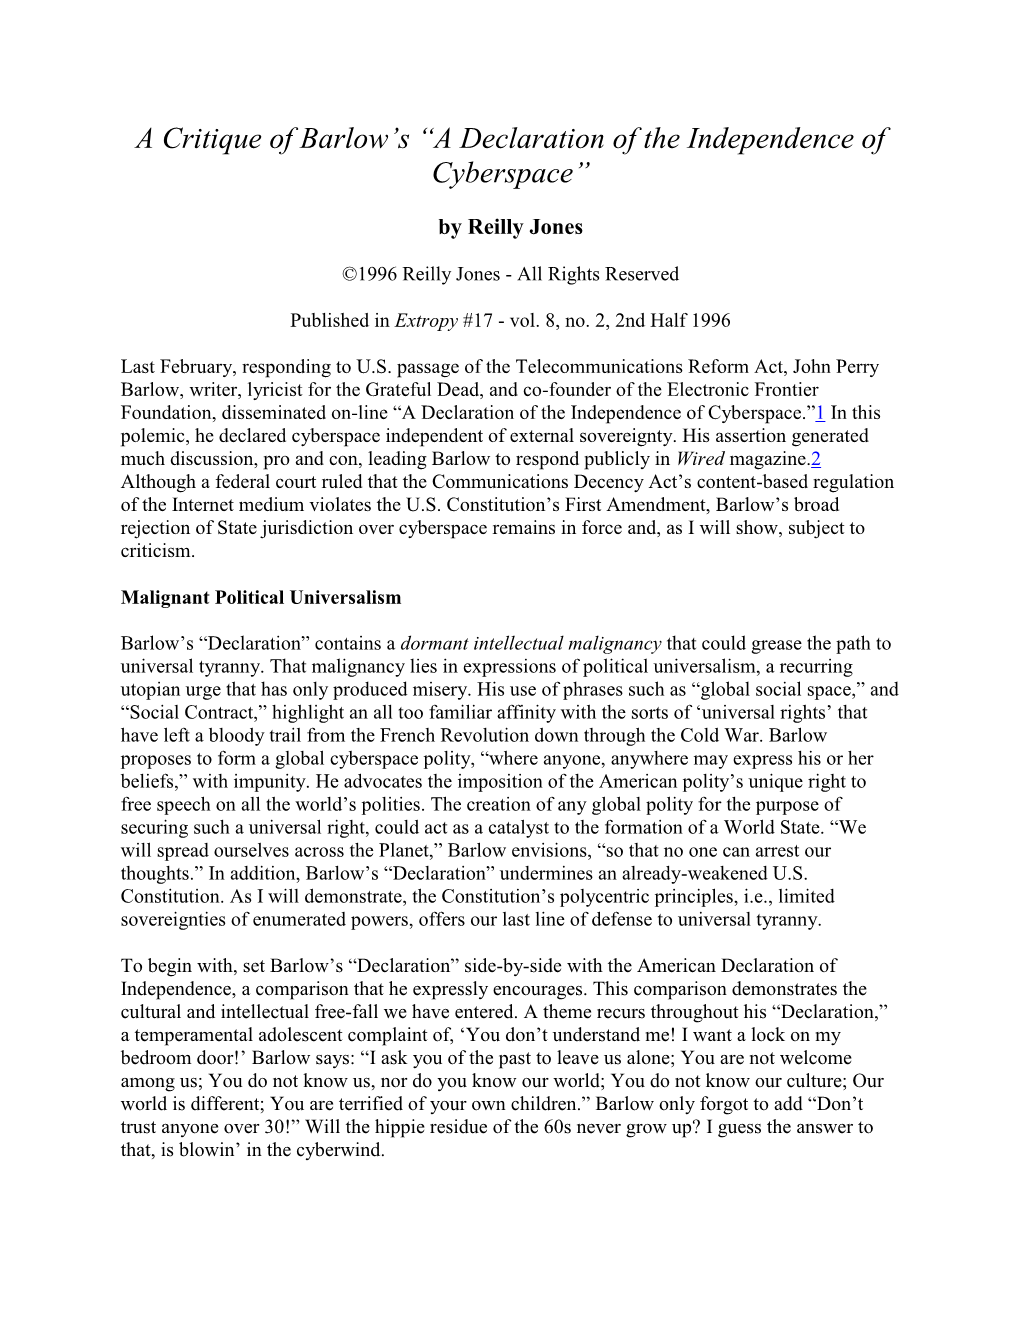 A Critique of Barlow's “A Declaration of the Independence of Cyberspace”